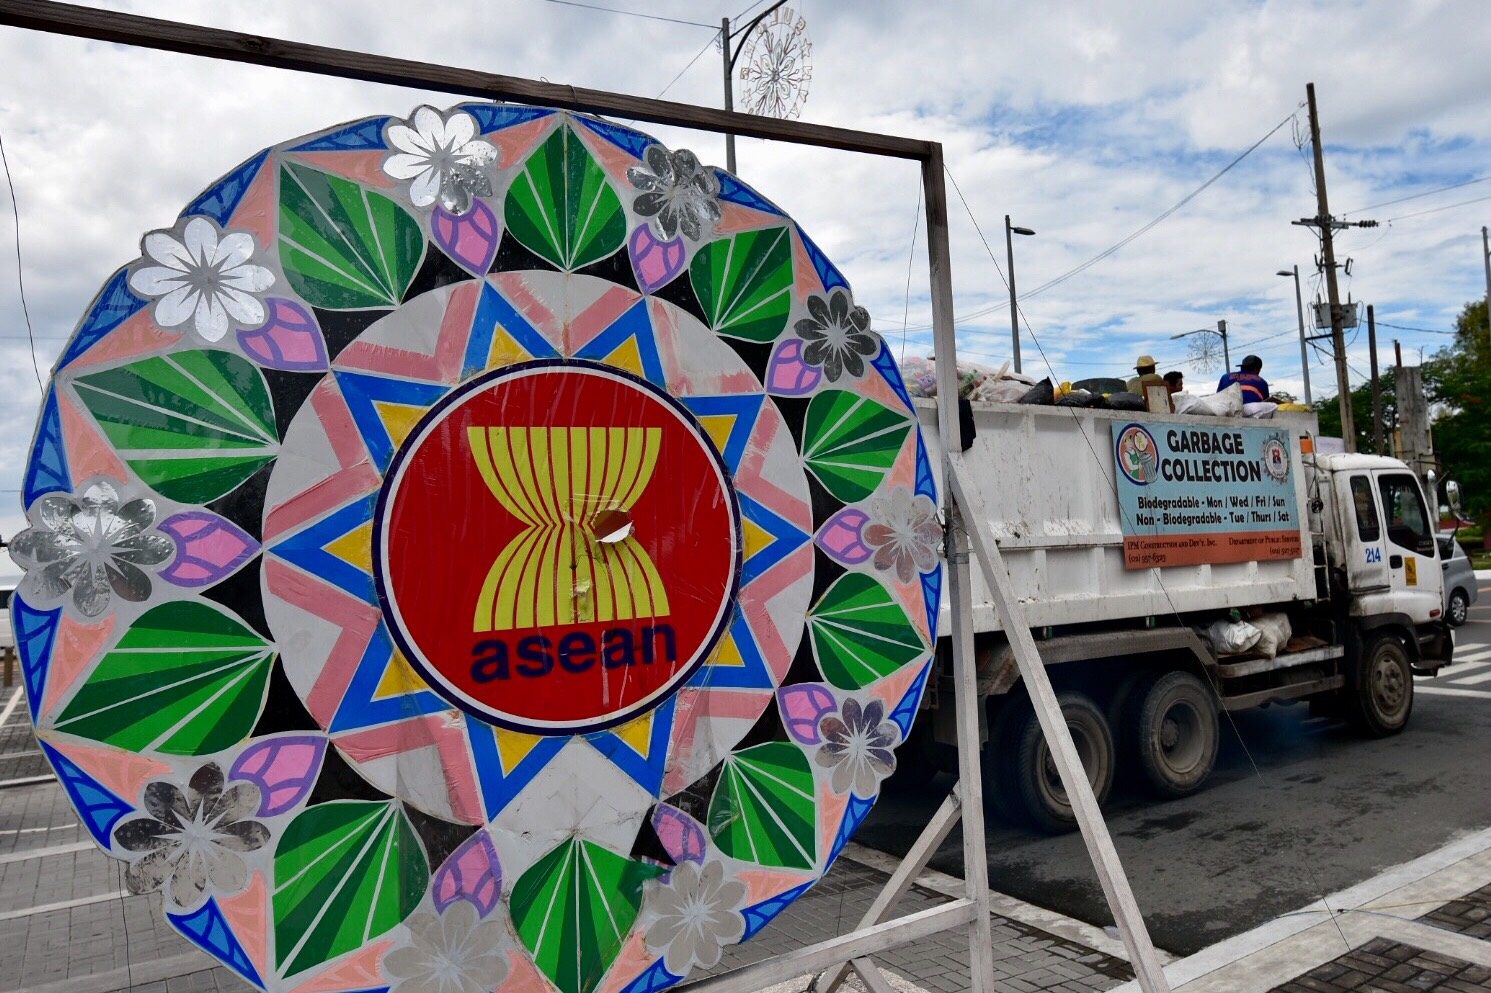 DECOR. An ASEAN sign with resembling the parol, a famous local lantern. Photo by Leanne Jazul/Rappler
 